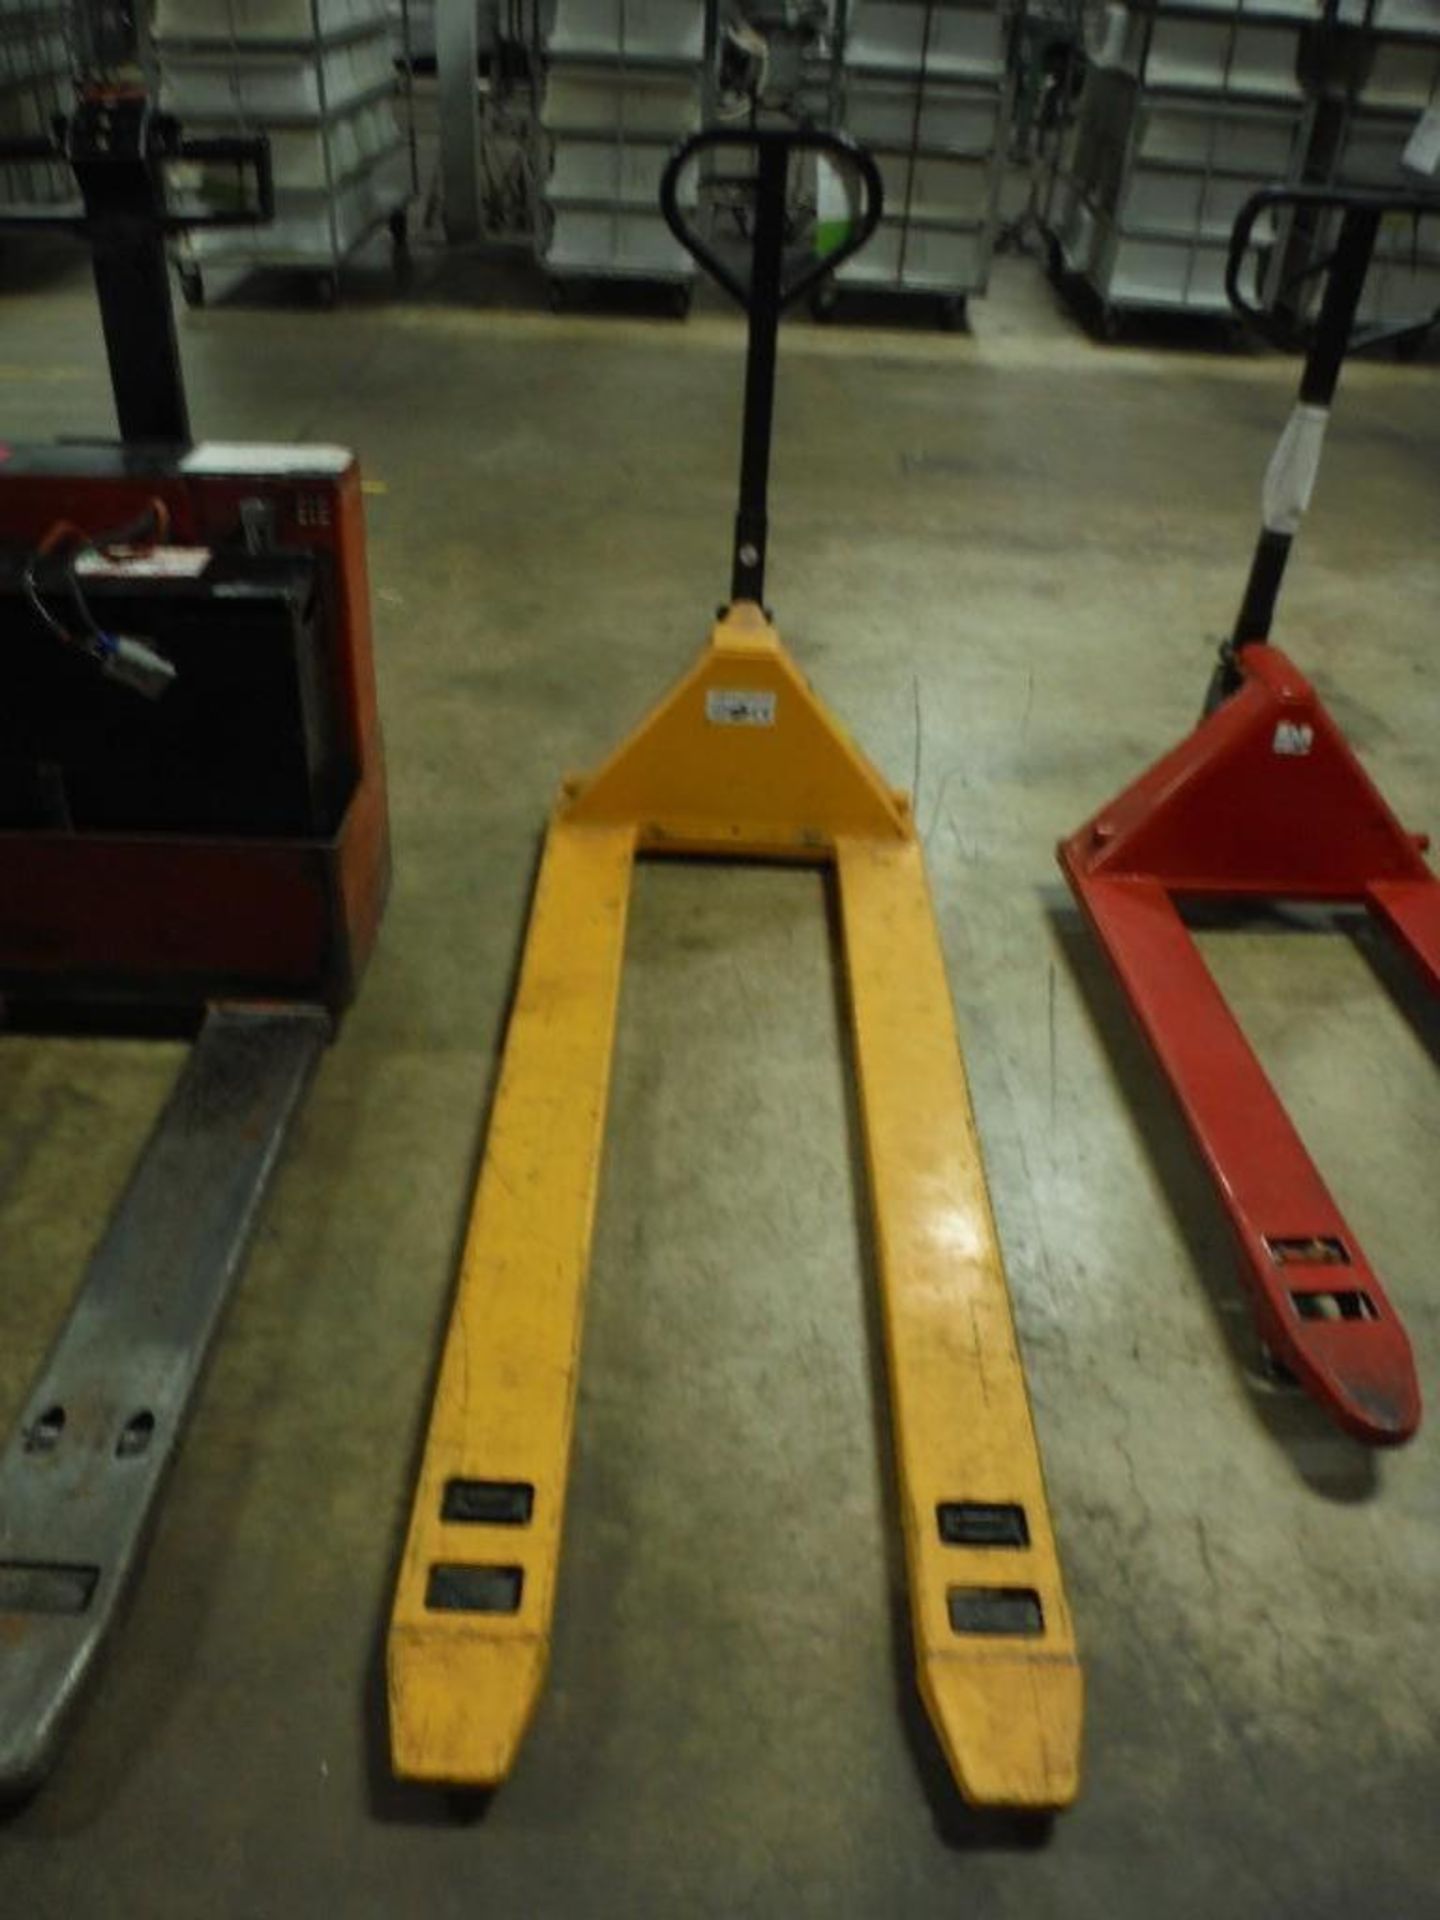 Uline extended pallet jack, Model H-1778, 3300 lb capacity, 72 in. forks, yellow - Rigging Fee: $25